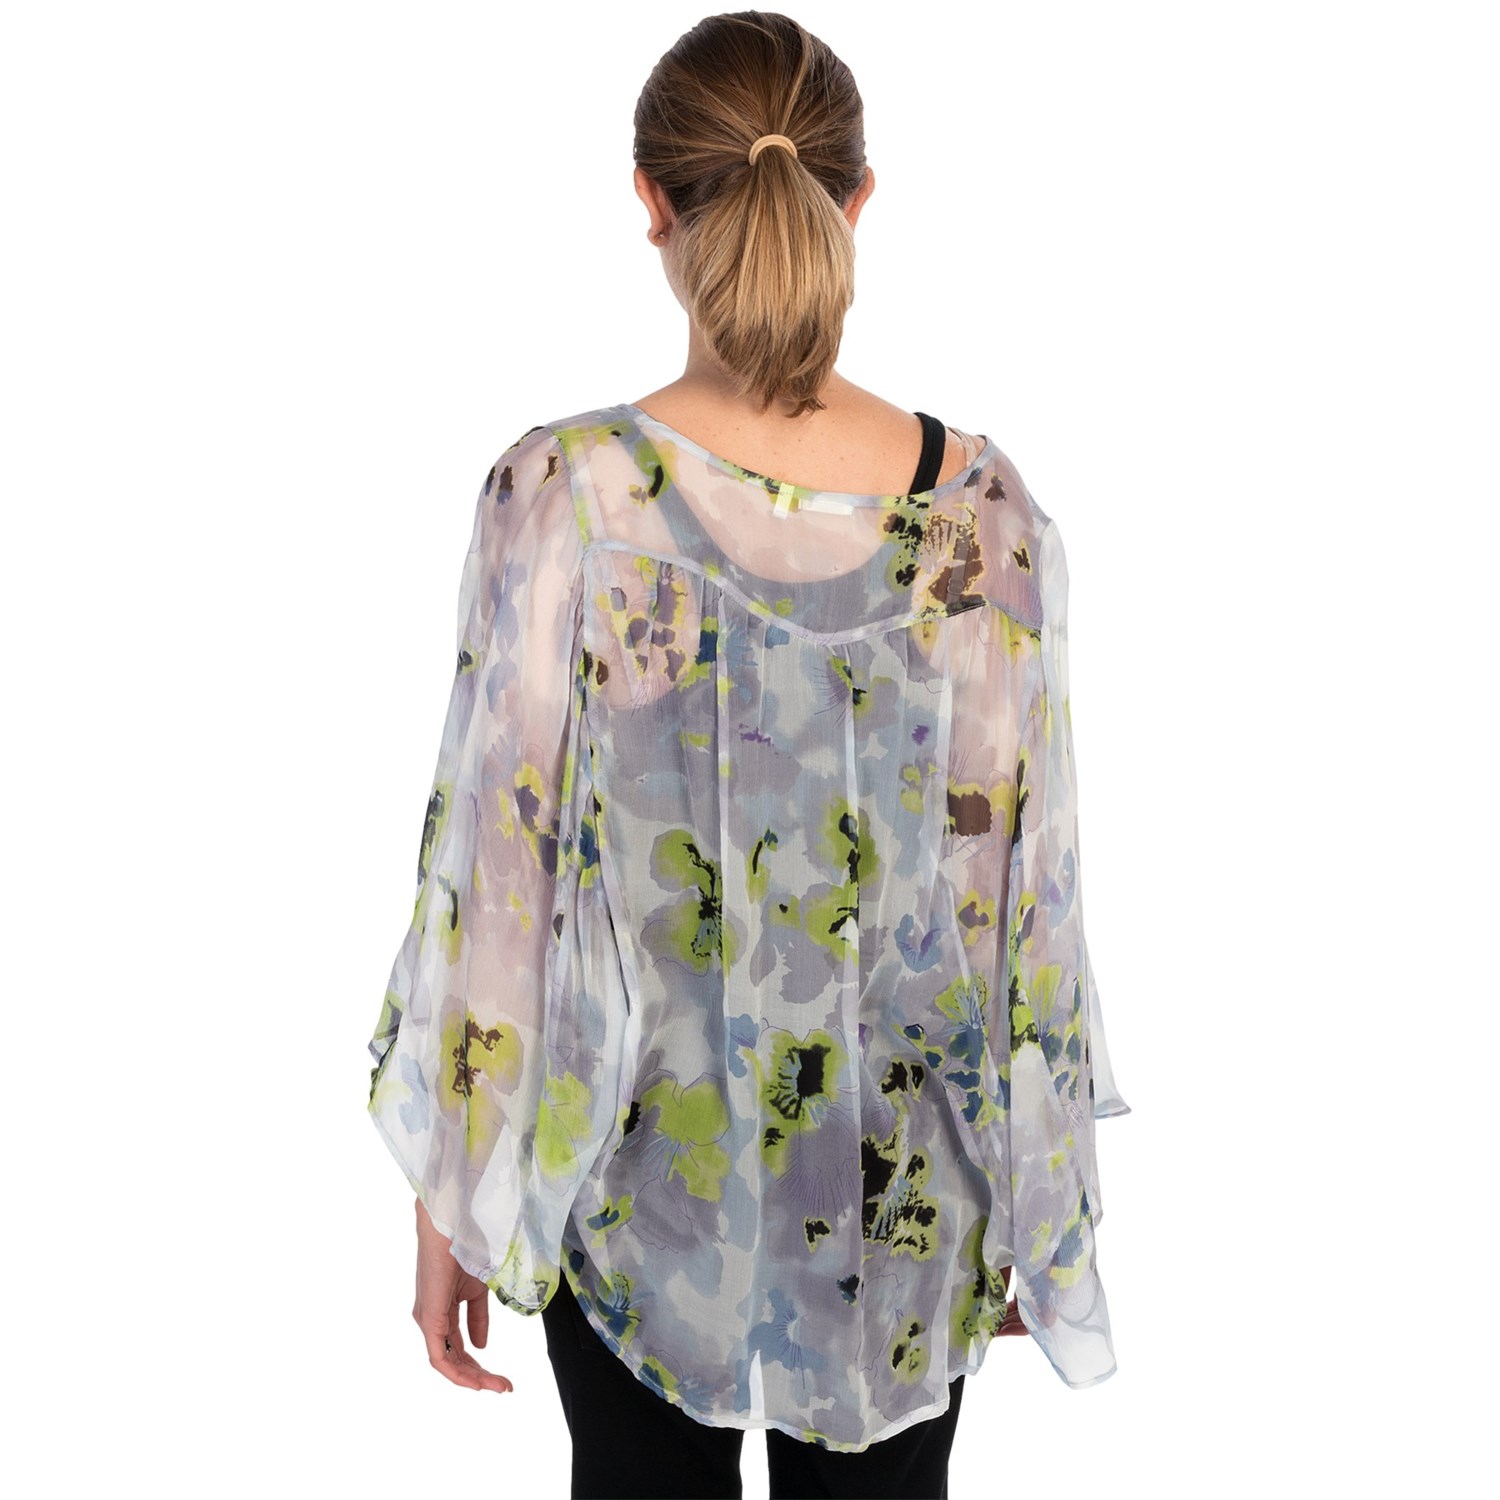 dylan Sheer Floral Poncho Blouse (For Women) 6747N - Save 89%